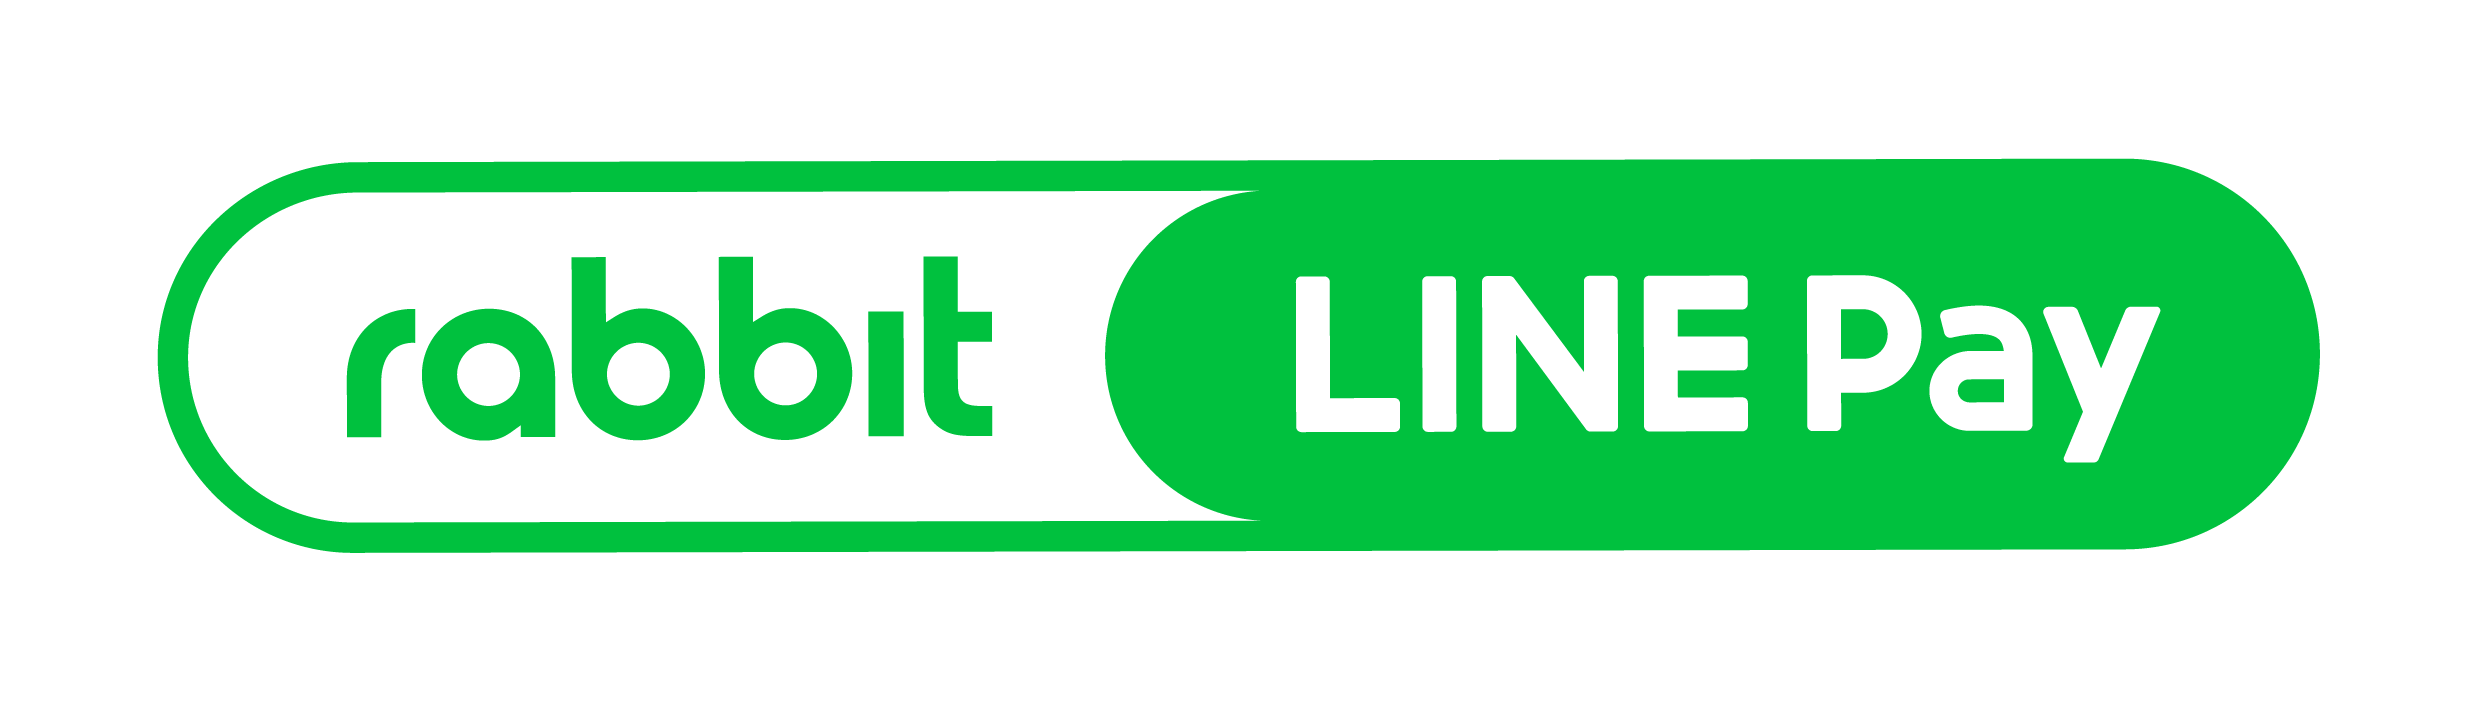 Pay Logo - LOGO usage guidelines - Technical Support : LINE Pay Merchant